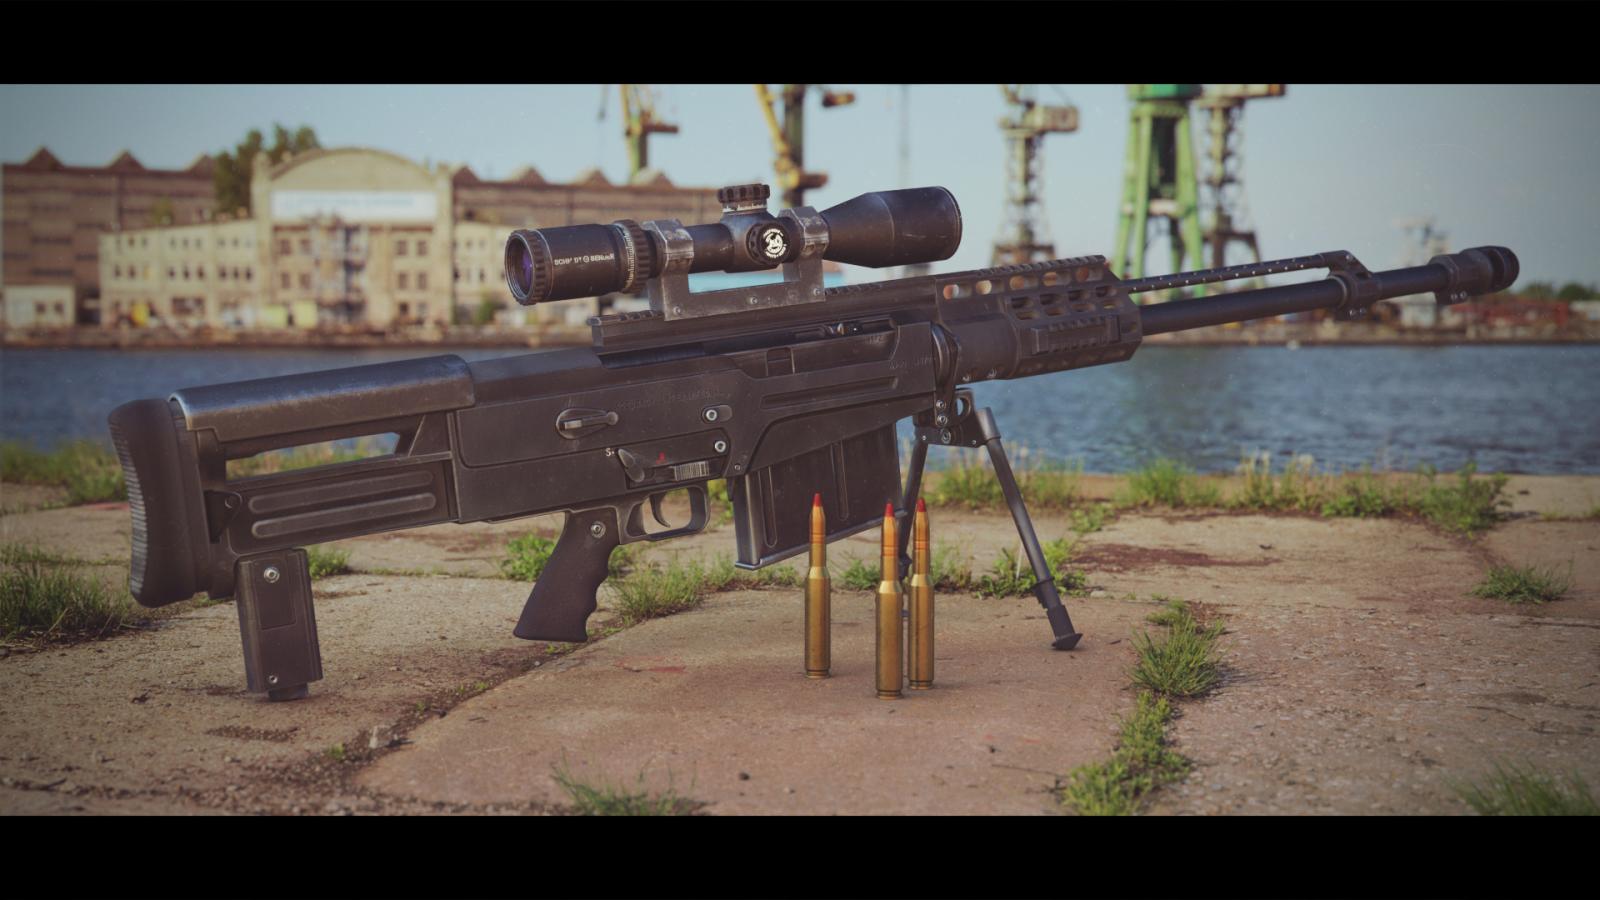 Sniper rifle  AS50